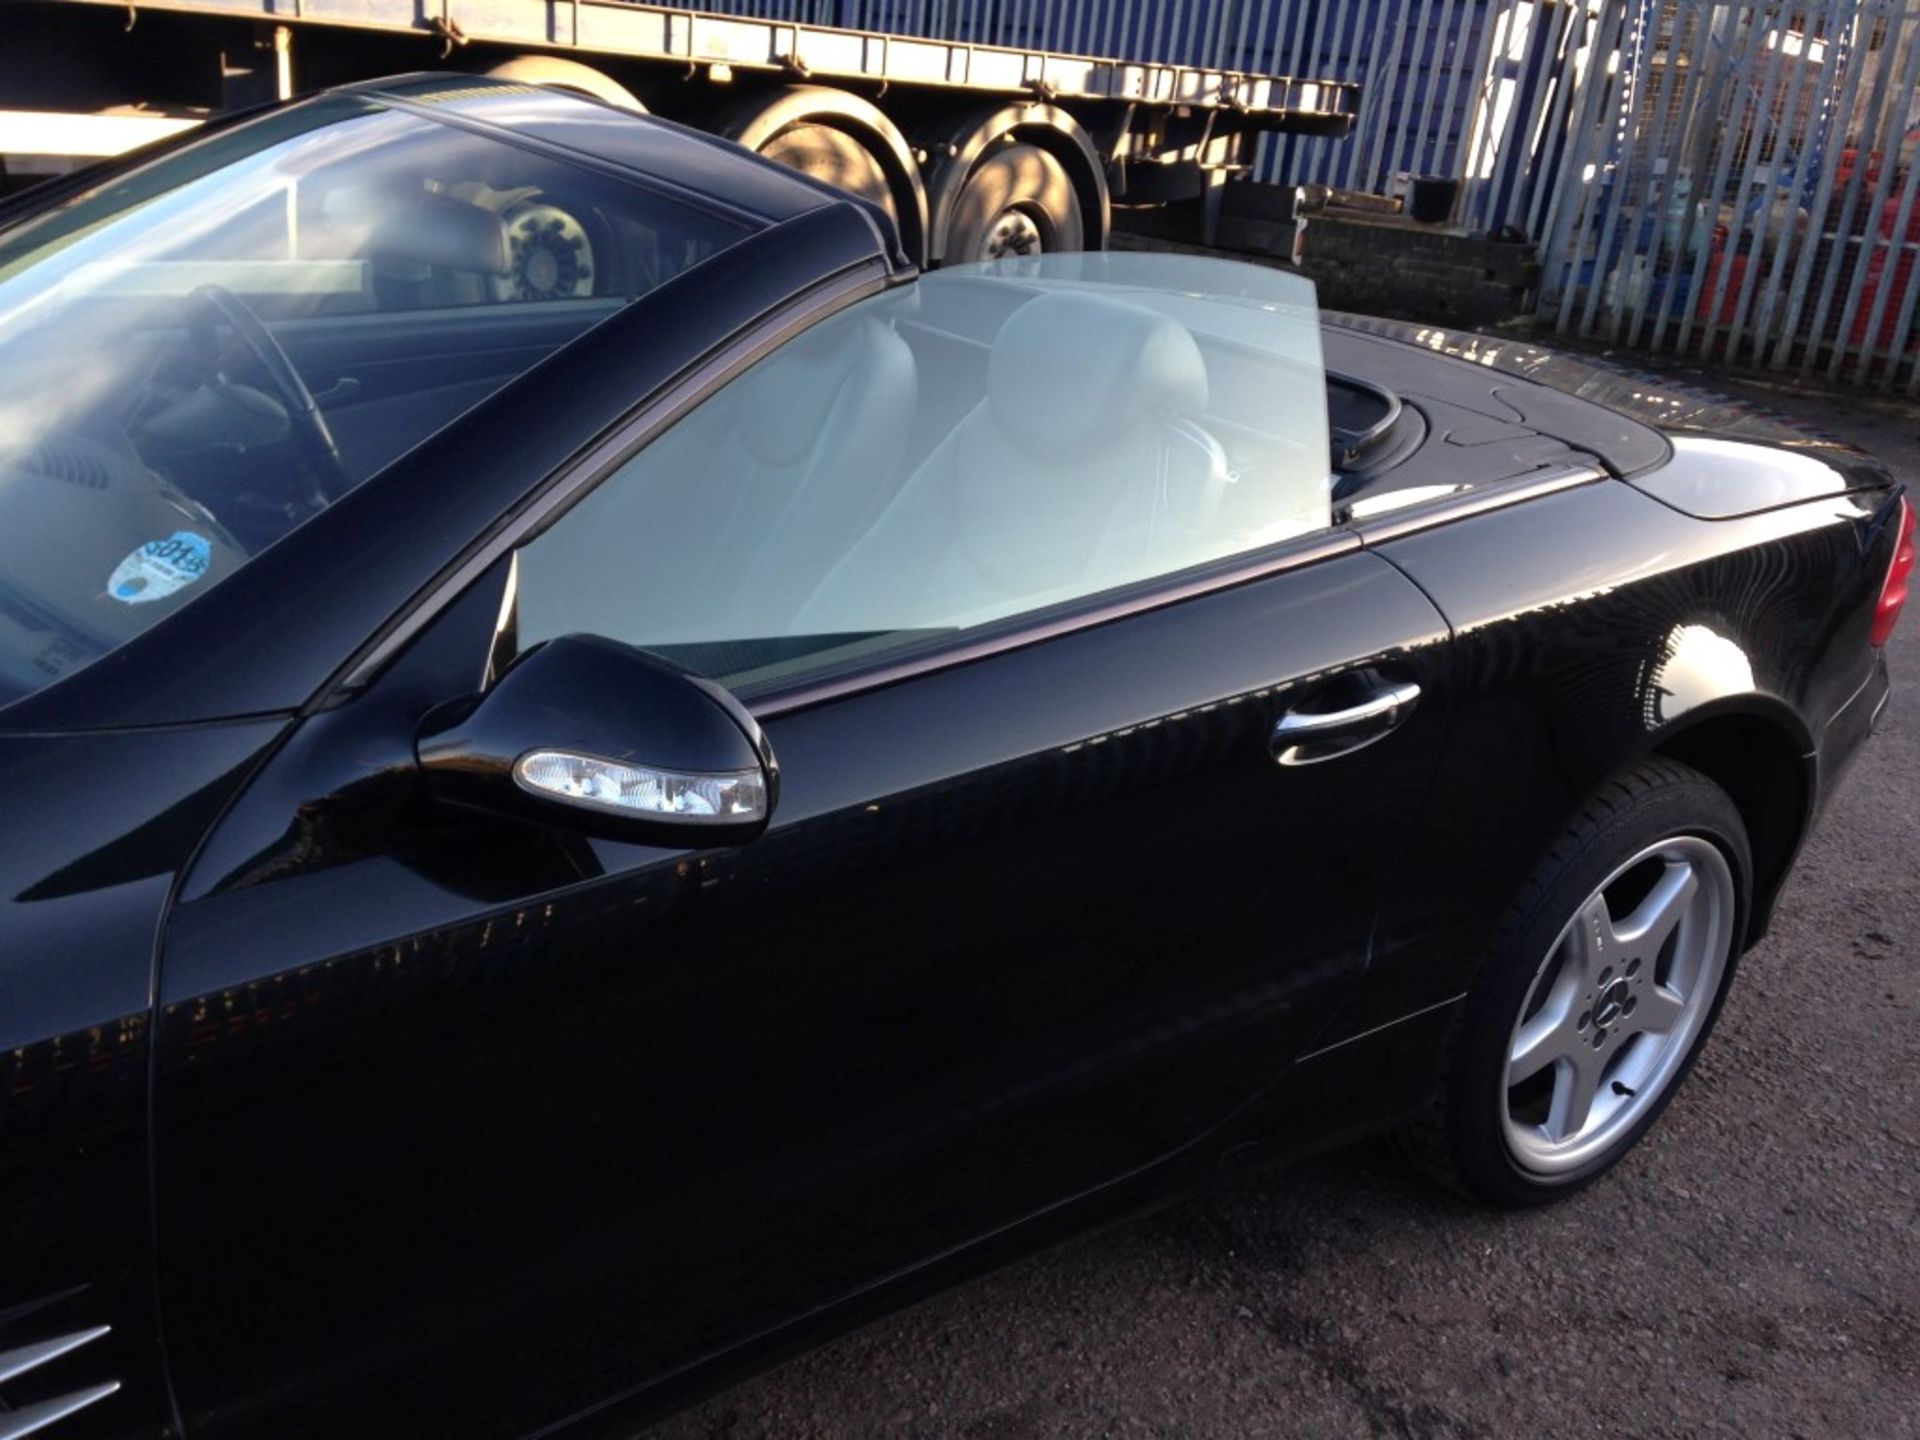 1 x Mercedes SL500 Automatic 5.0 Convertible - Petrol - Year 2002 - 94,500 Miles - Long MOT Expiry - Image 26 of 48